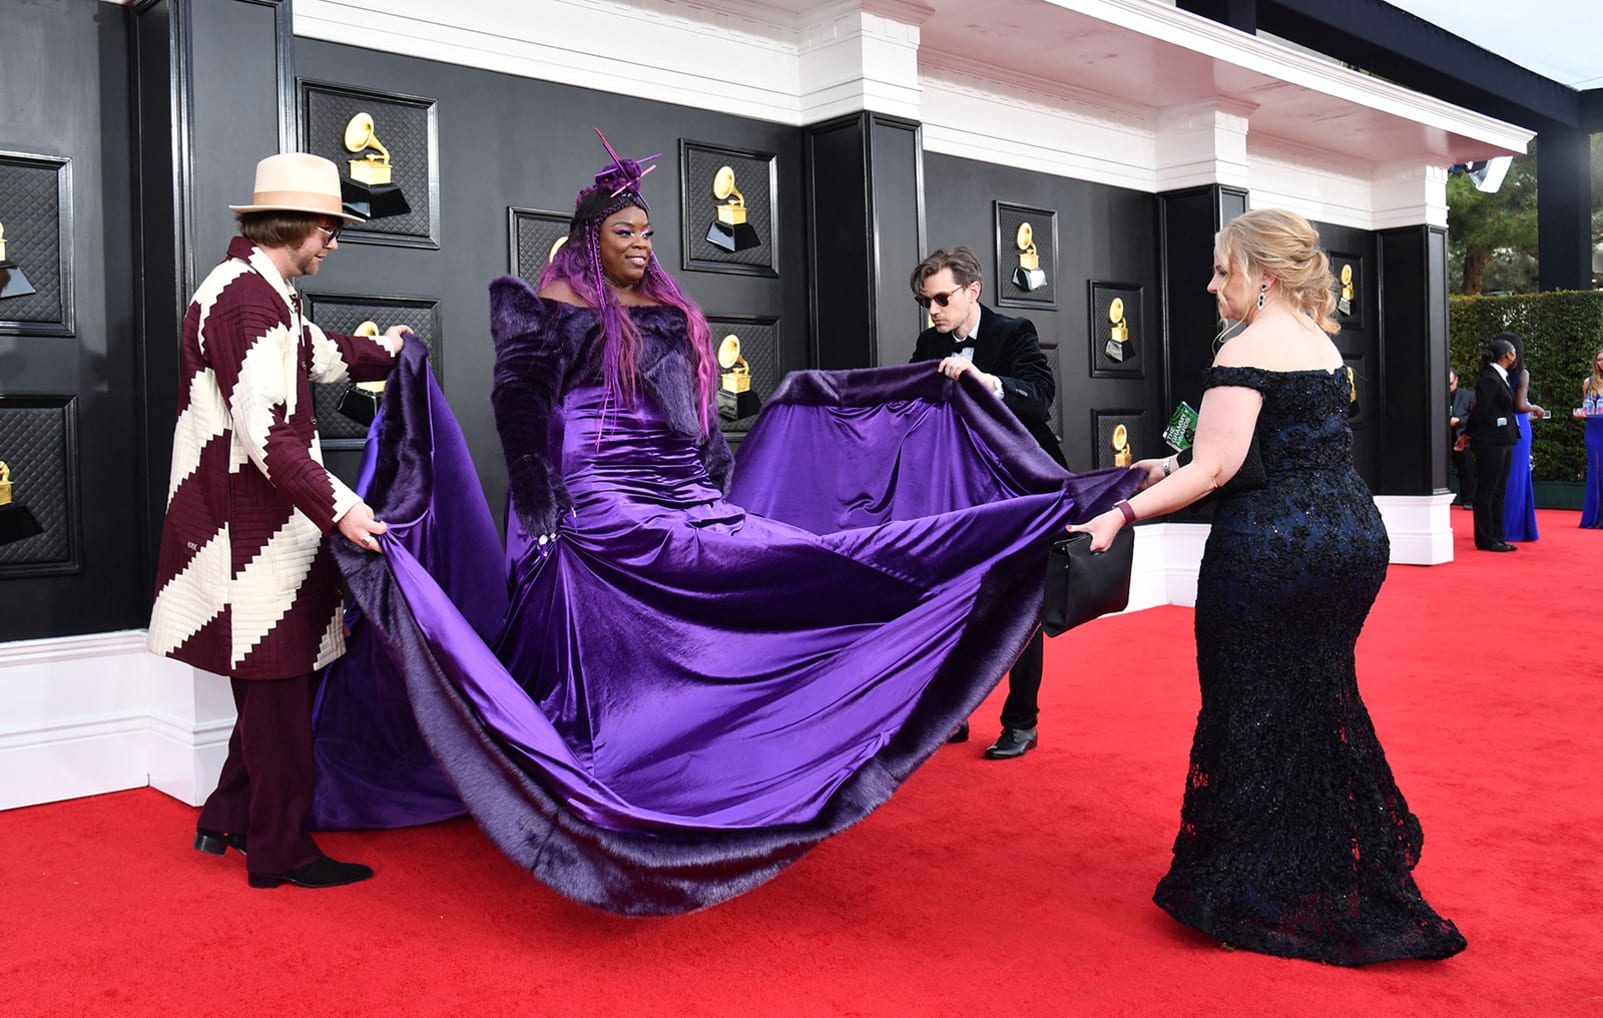 Singer Yola needed help from several other attendees to unfurl the full splendor of her bold, head-to-toe purple outfit. 